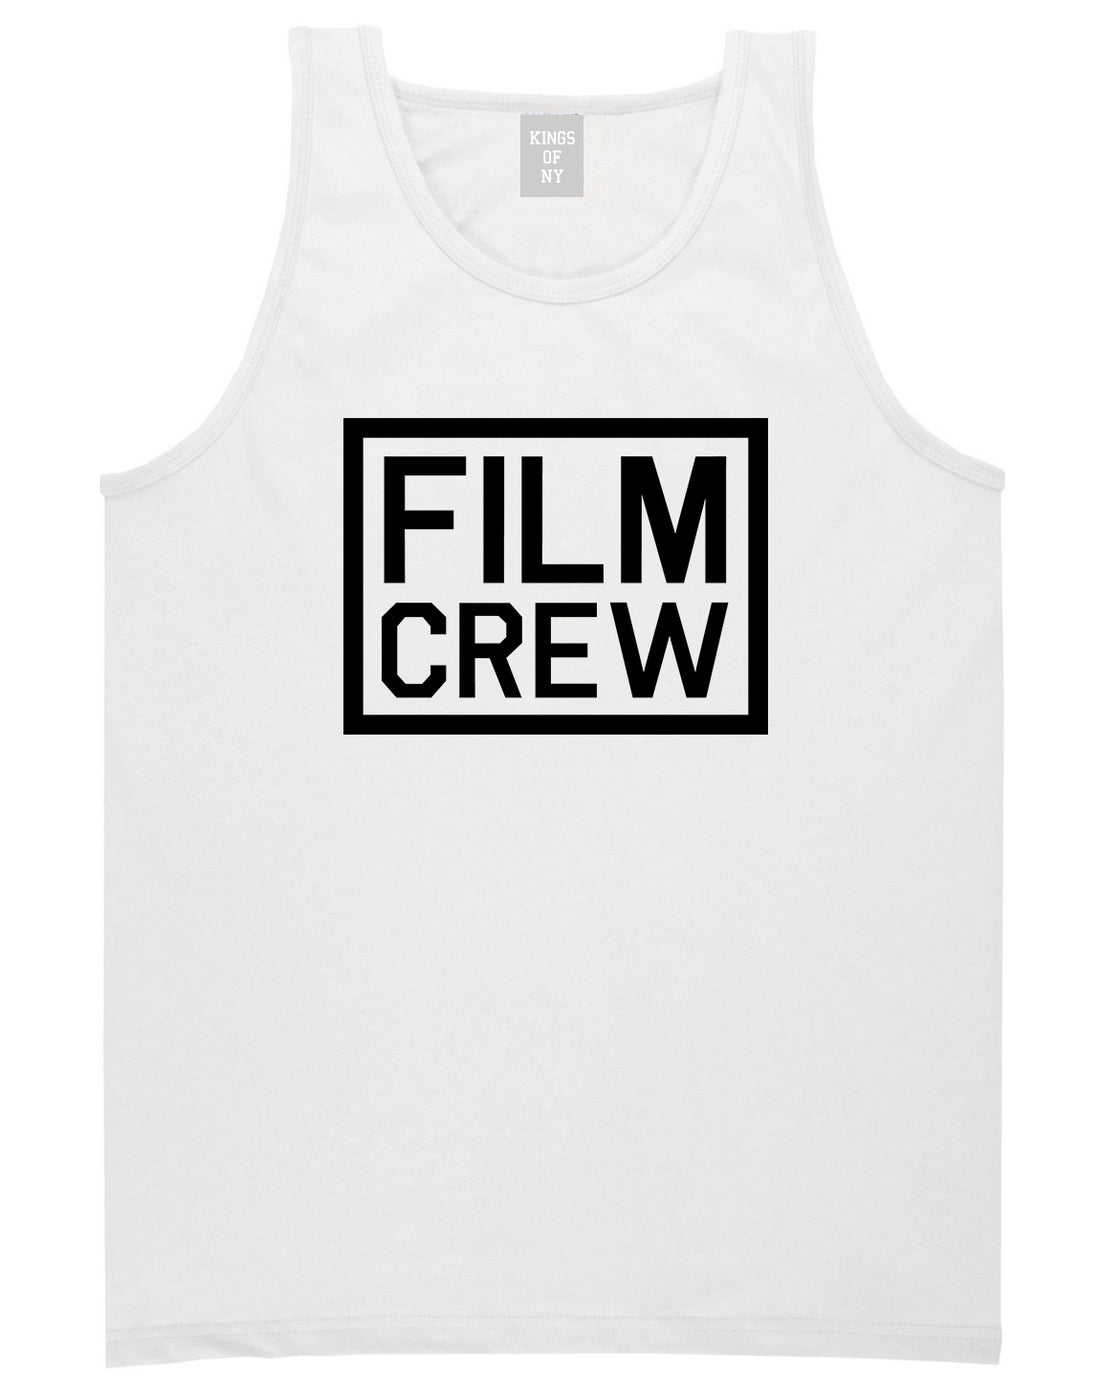 Film Crew Mens White Tank Top Shirt by KINGS OF NY